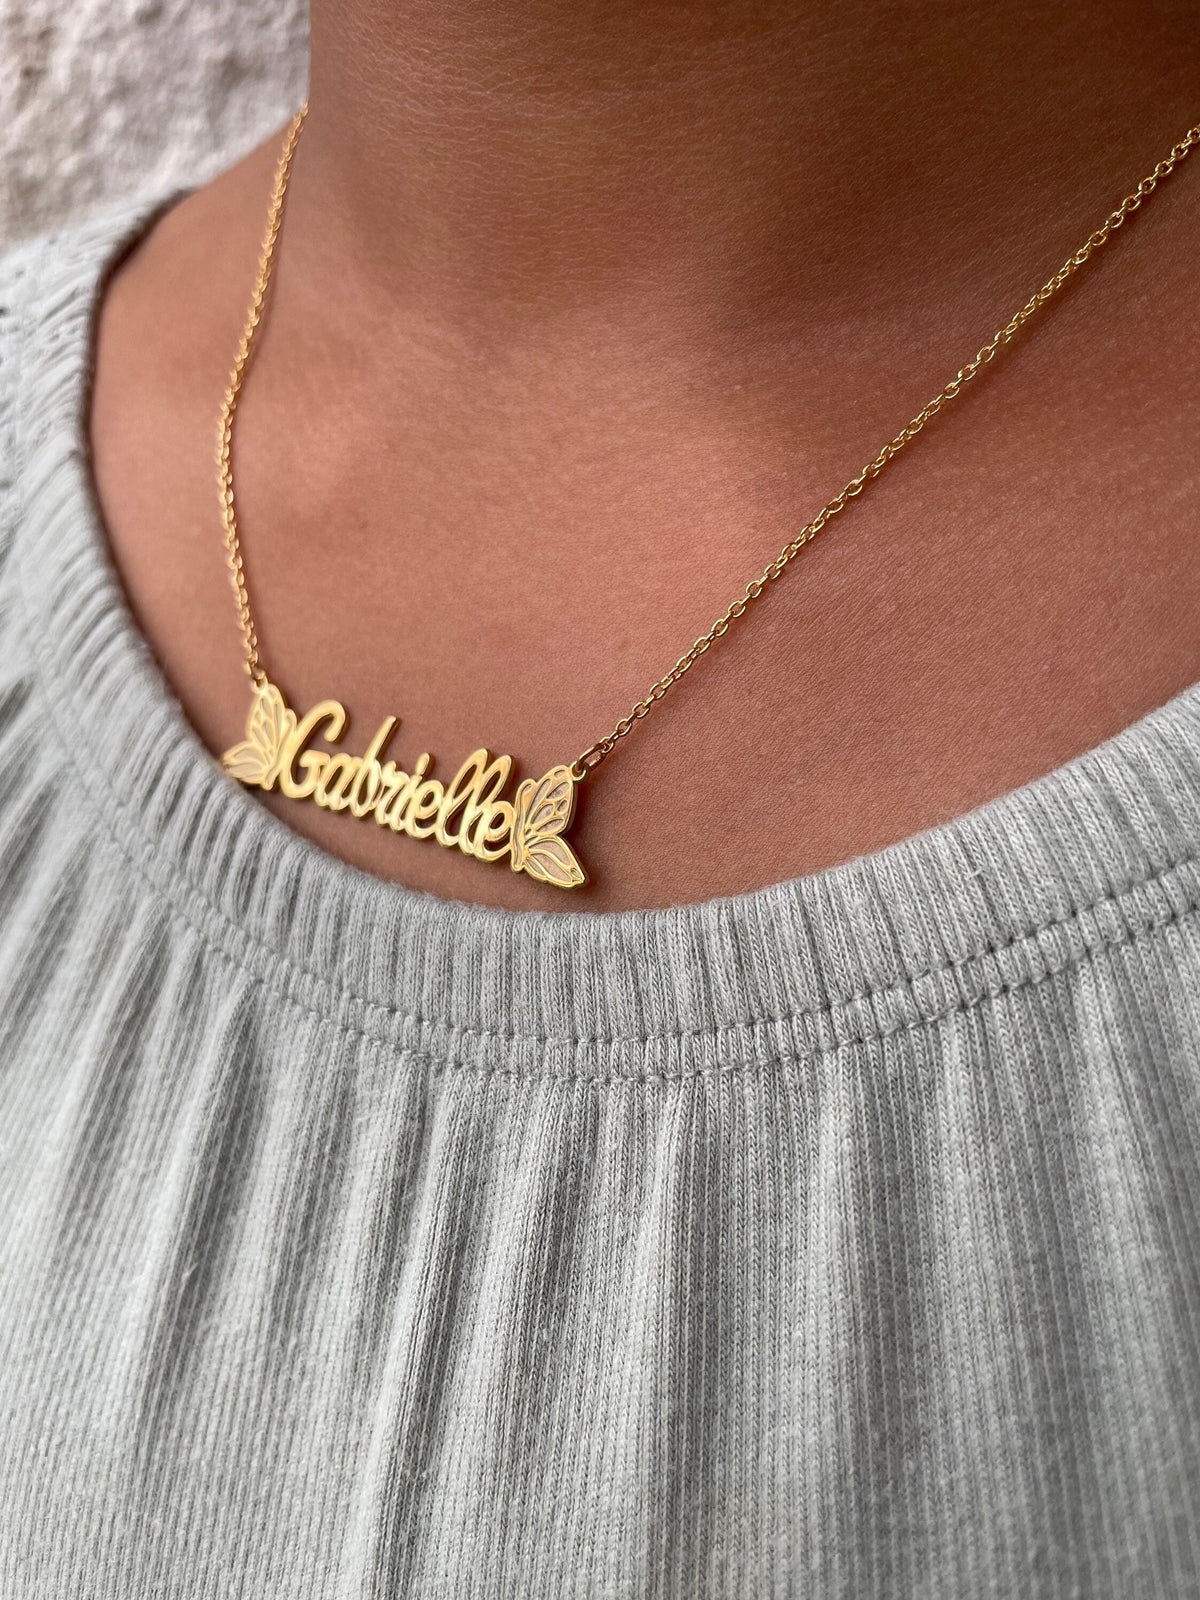 Personalized Butterfly Name Necklace in Sterling Silver or 10k Gold  (1.45 inches wide)